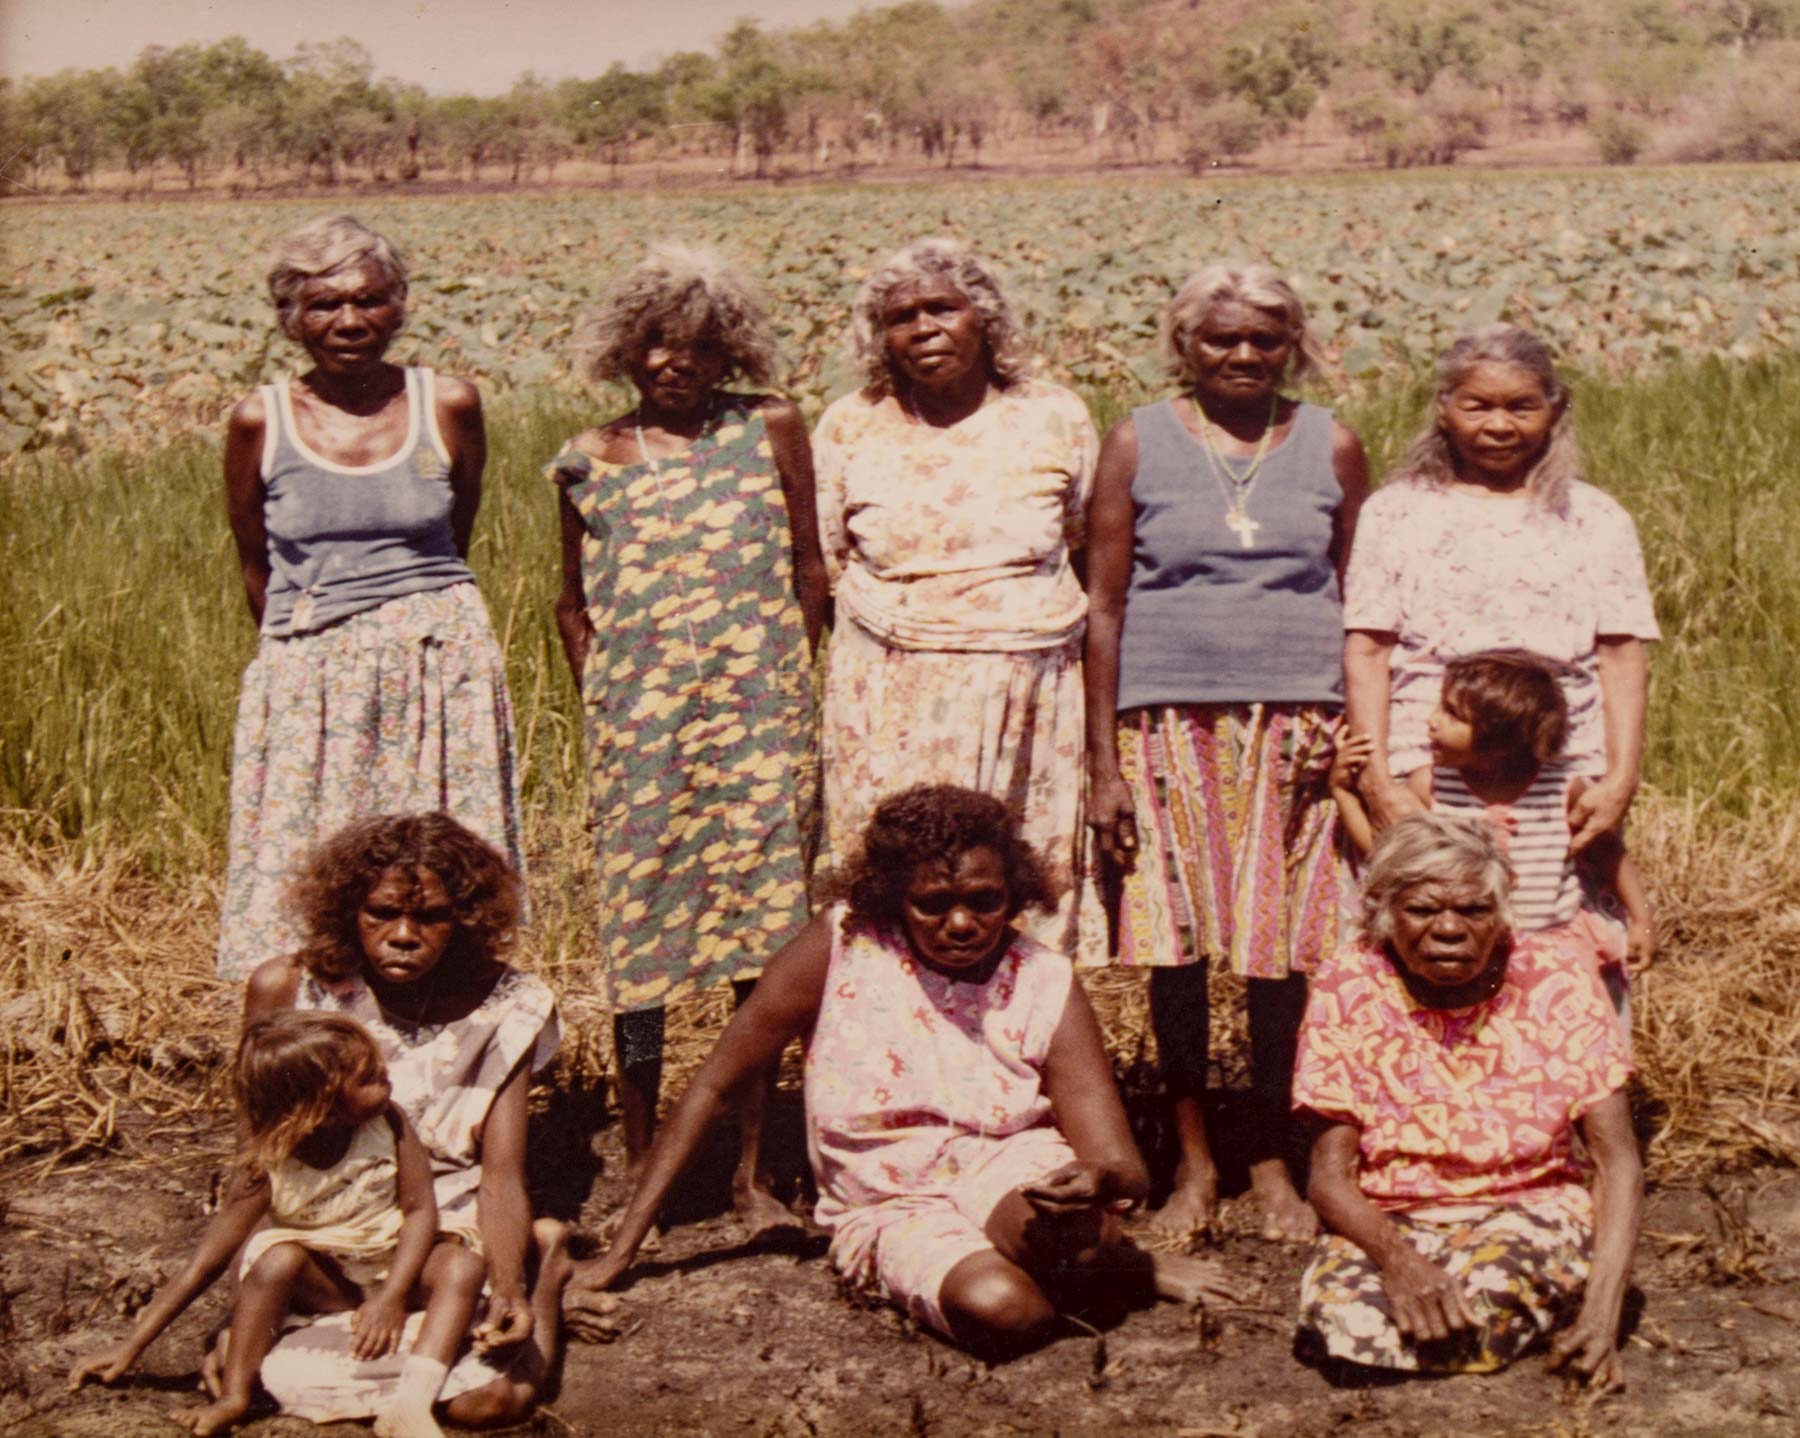 Group photo of the Aboriginal women who founded Merrepen Arts